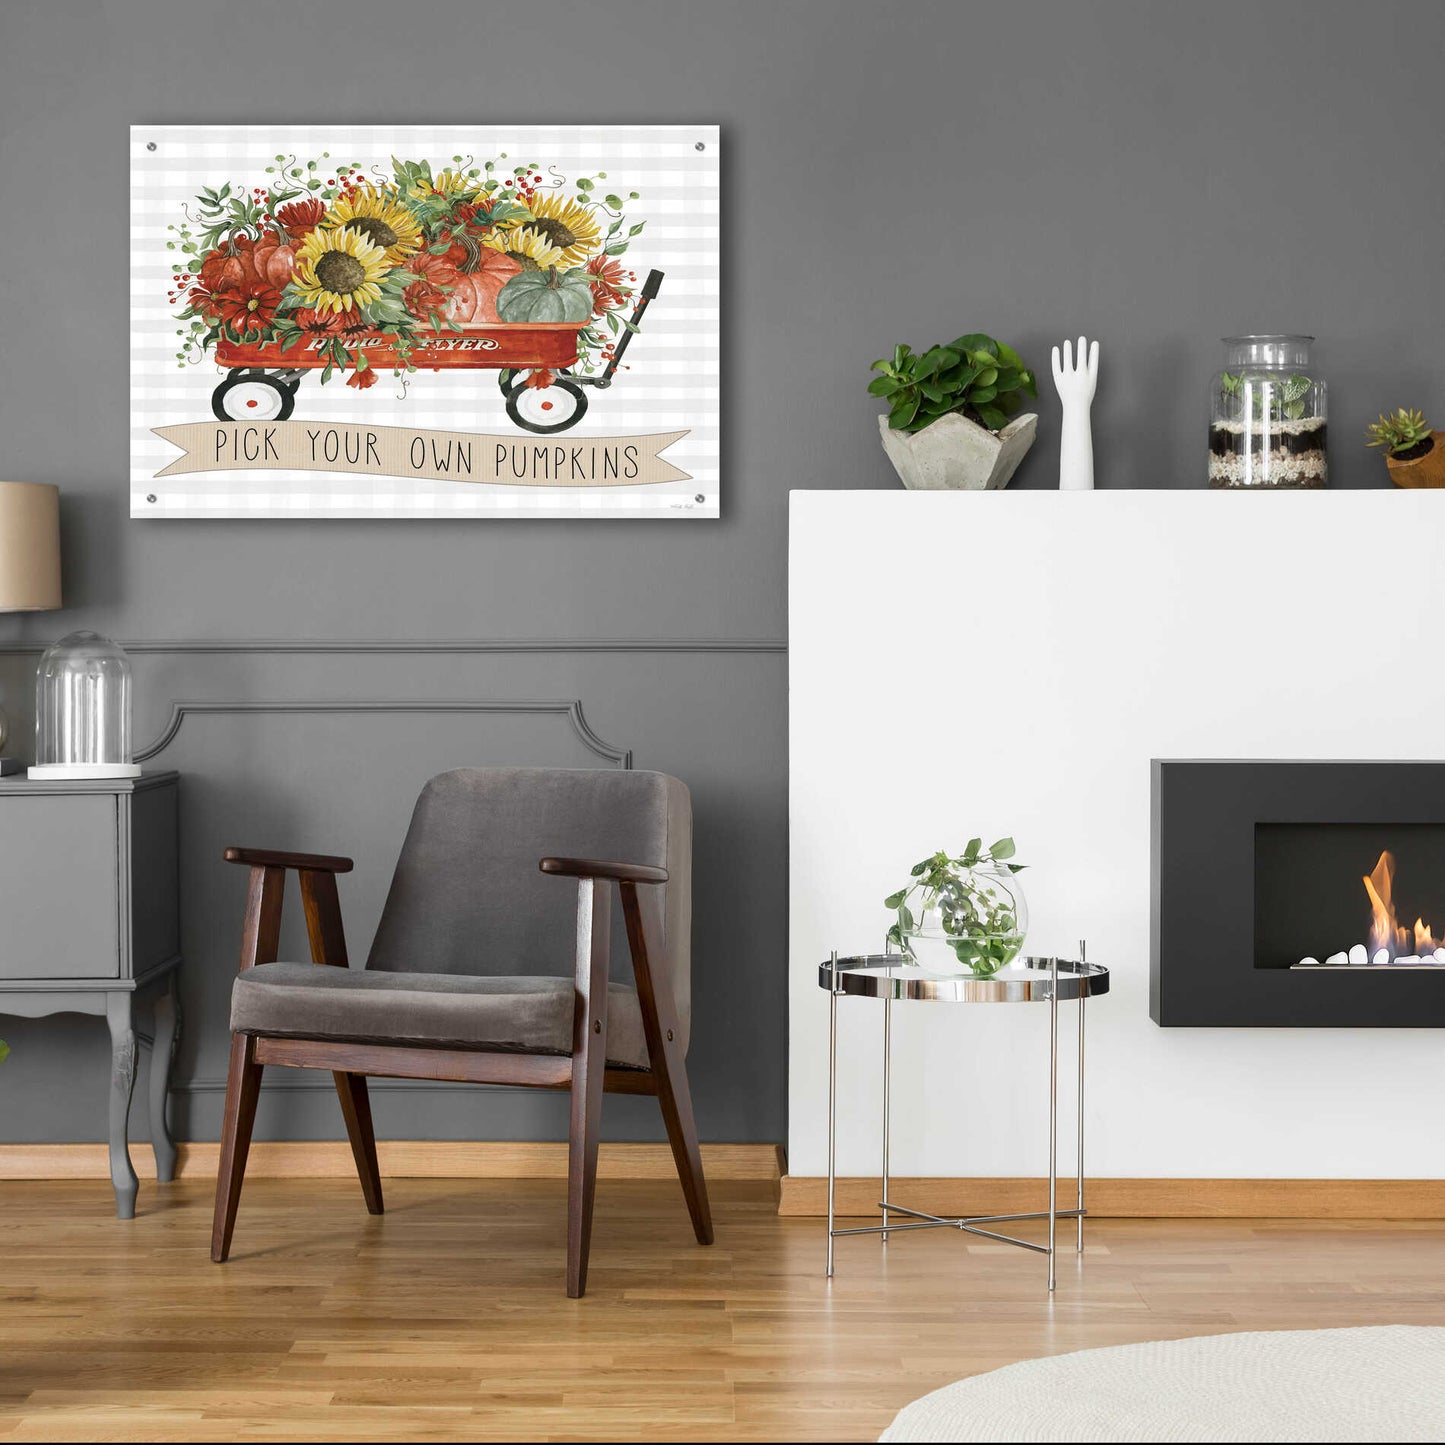 Epic Art 'Pick Your Own Pumpkins Wagon' by Cindy Jacobs, Acrylic Glass Wall Art,36x24